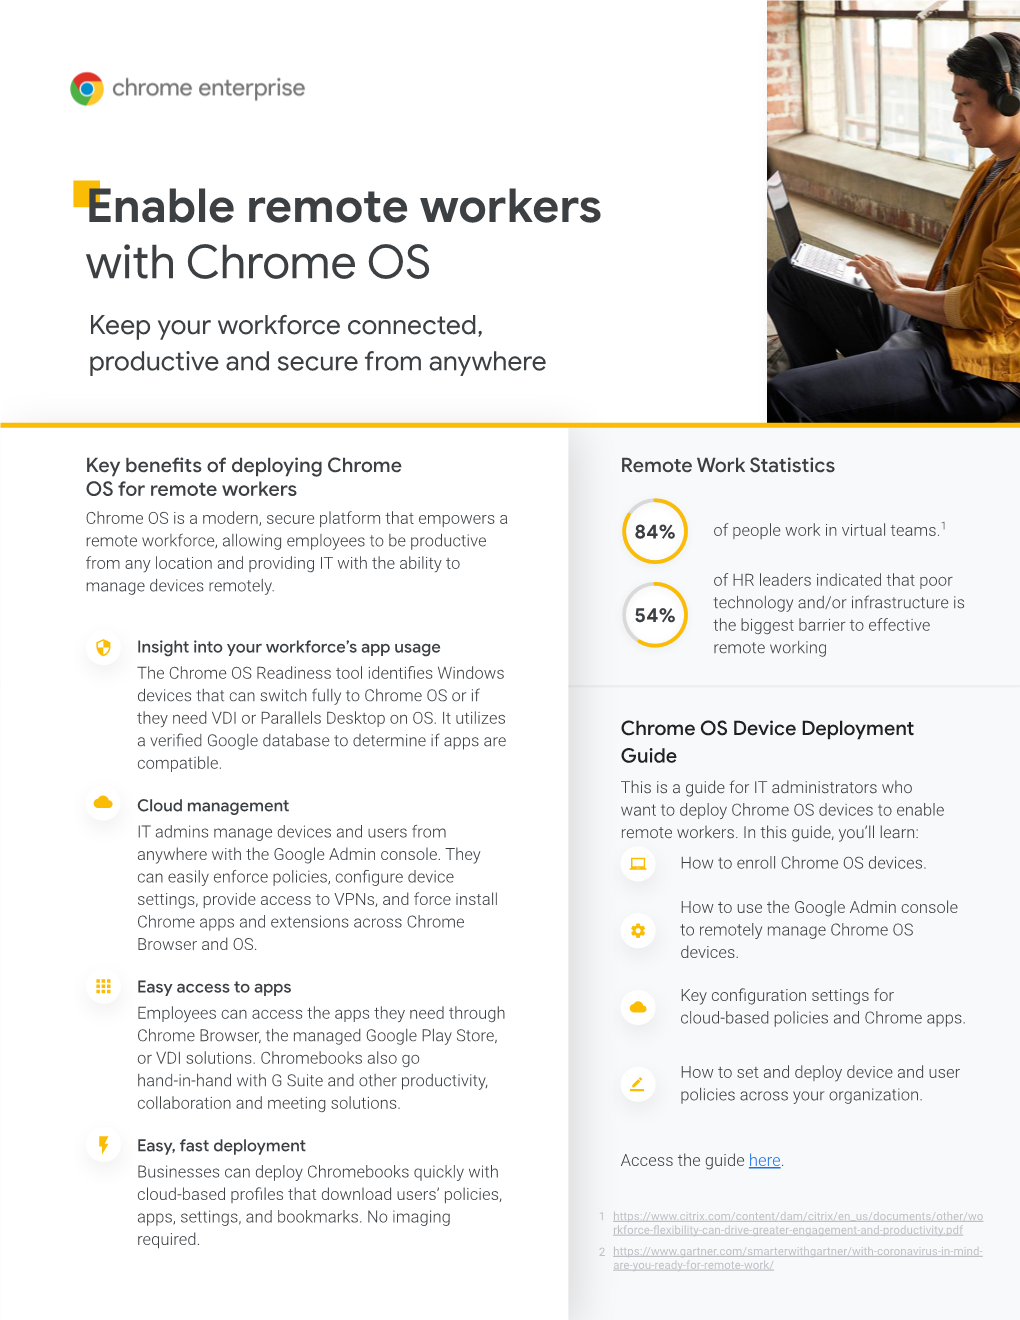 Enable Remote Workers with Chrome OS Keep Your Workforce Connected, Productive and Secure from Anywhere